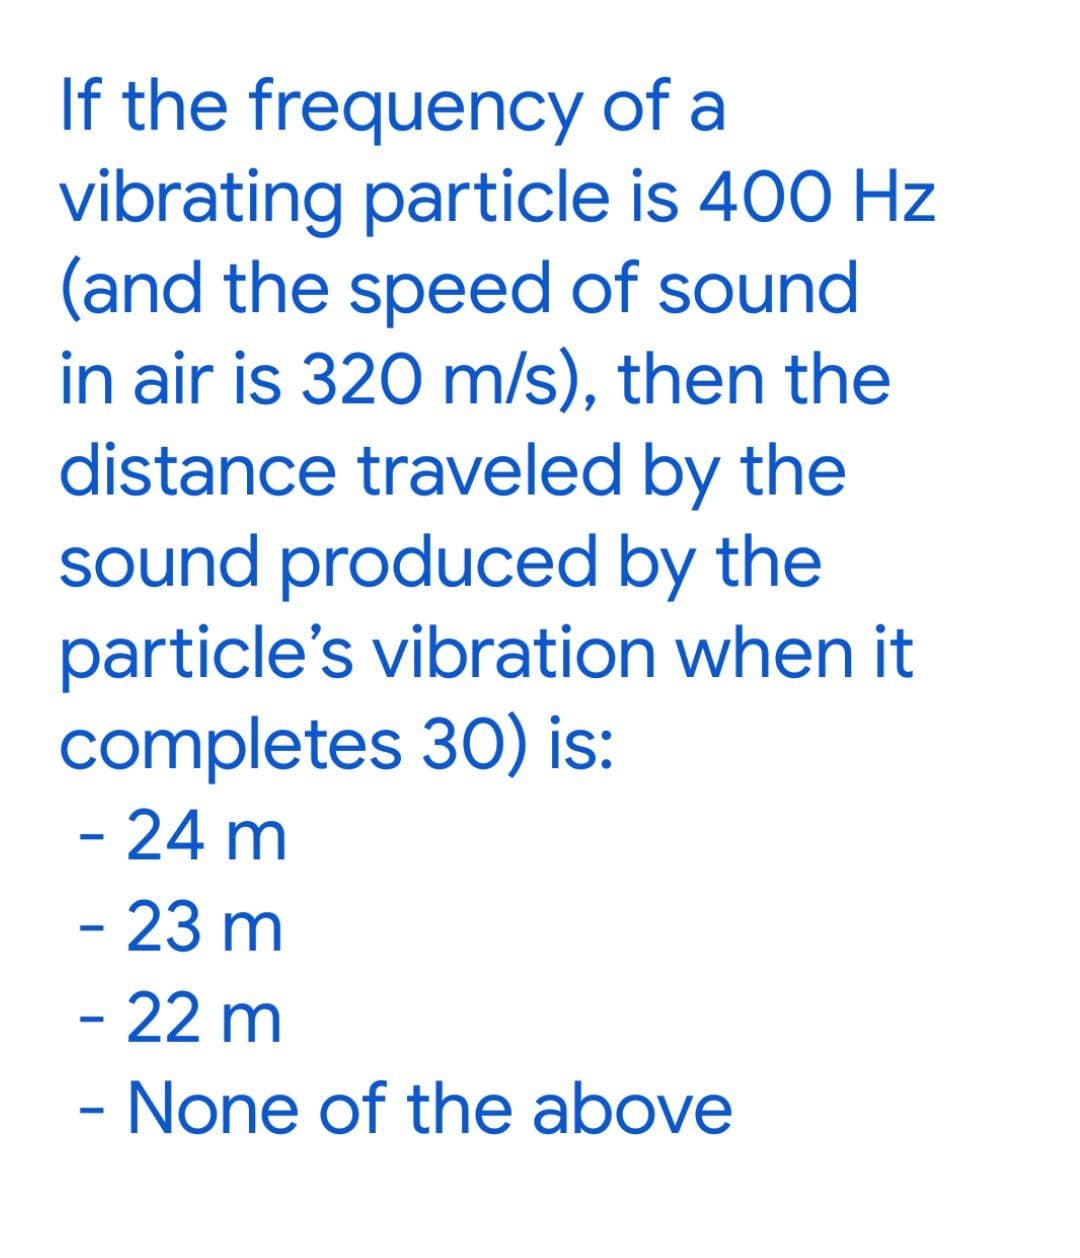 If the frequency of a
vibrating particle is 400 Hz
(and the speed of sound
in air is 320 m/s), then the
distance traveled by the
sound produced by the
particle's vibration when it
completes 30) is:
- 24 m
- 23 m
- 22 m
- None of the above